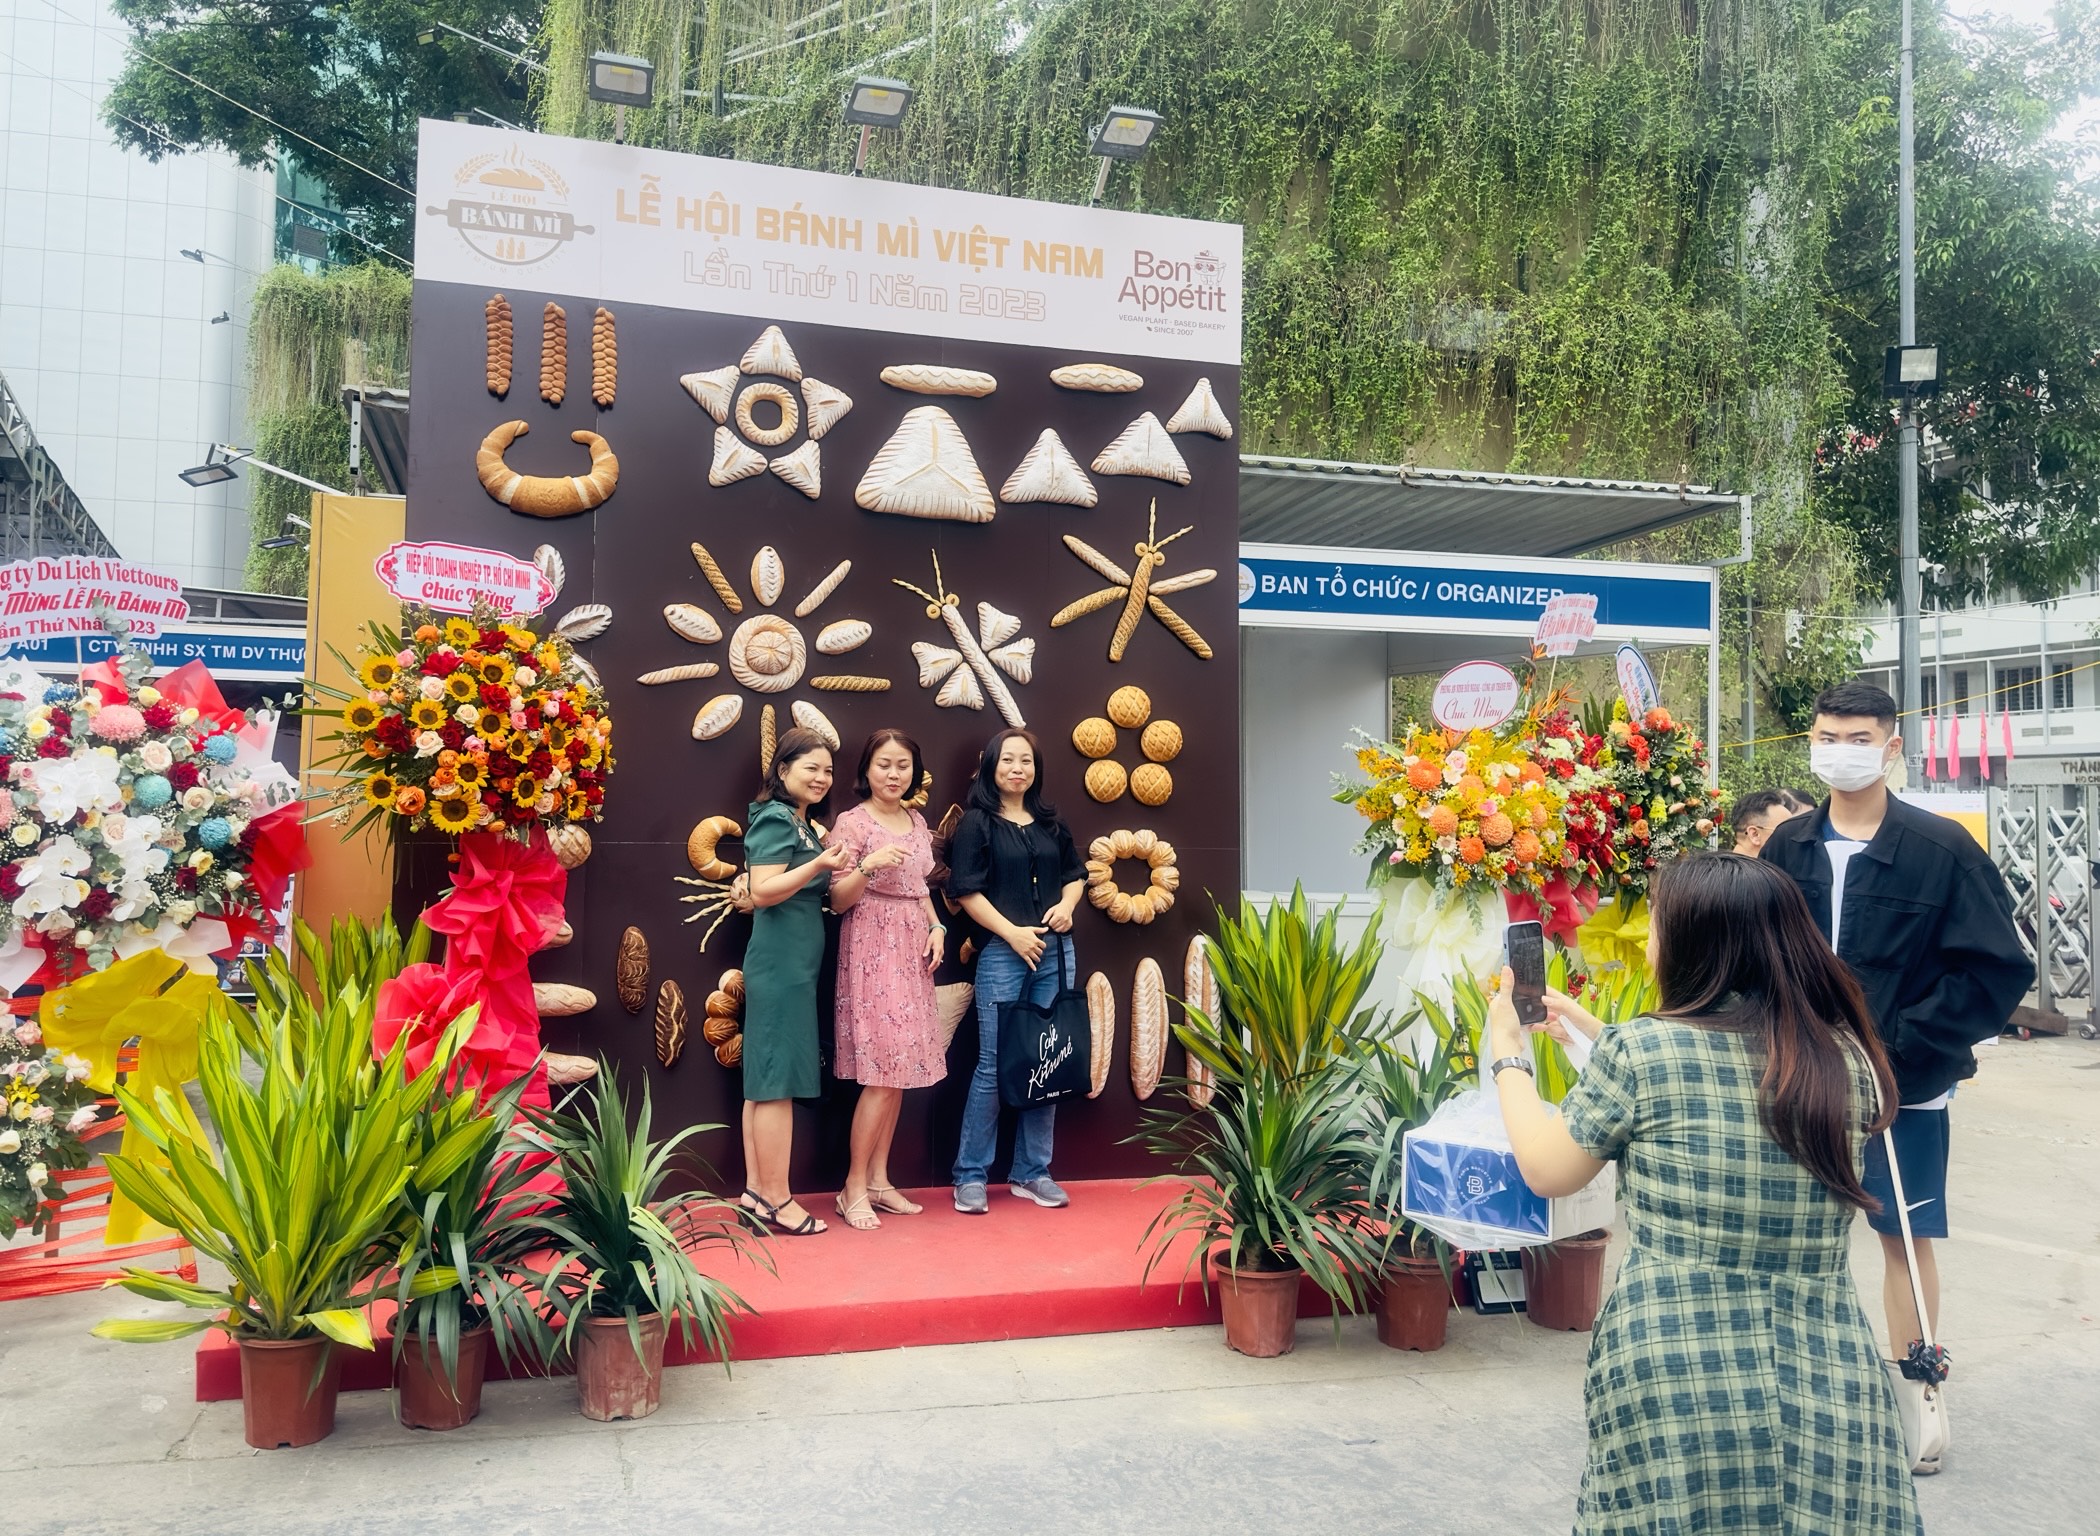 A woman takes a photograph of her friends with a picture decorated with loaves of banh mi. Photo: Tieu Bac / Tuoi Tre News